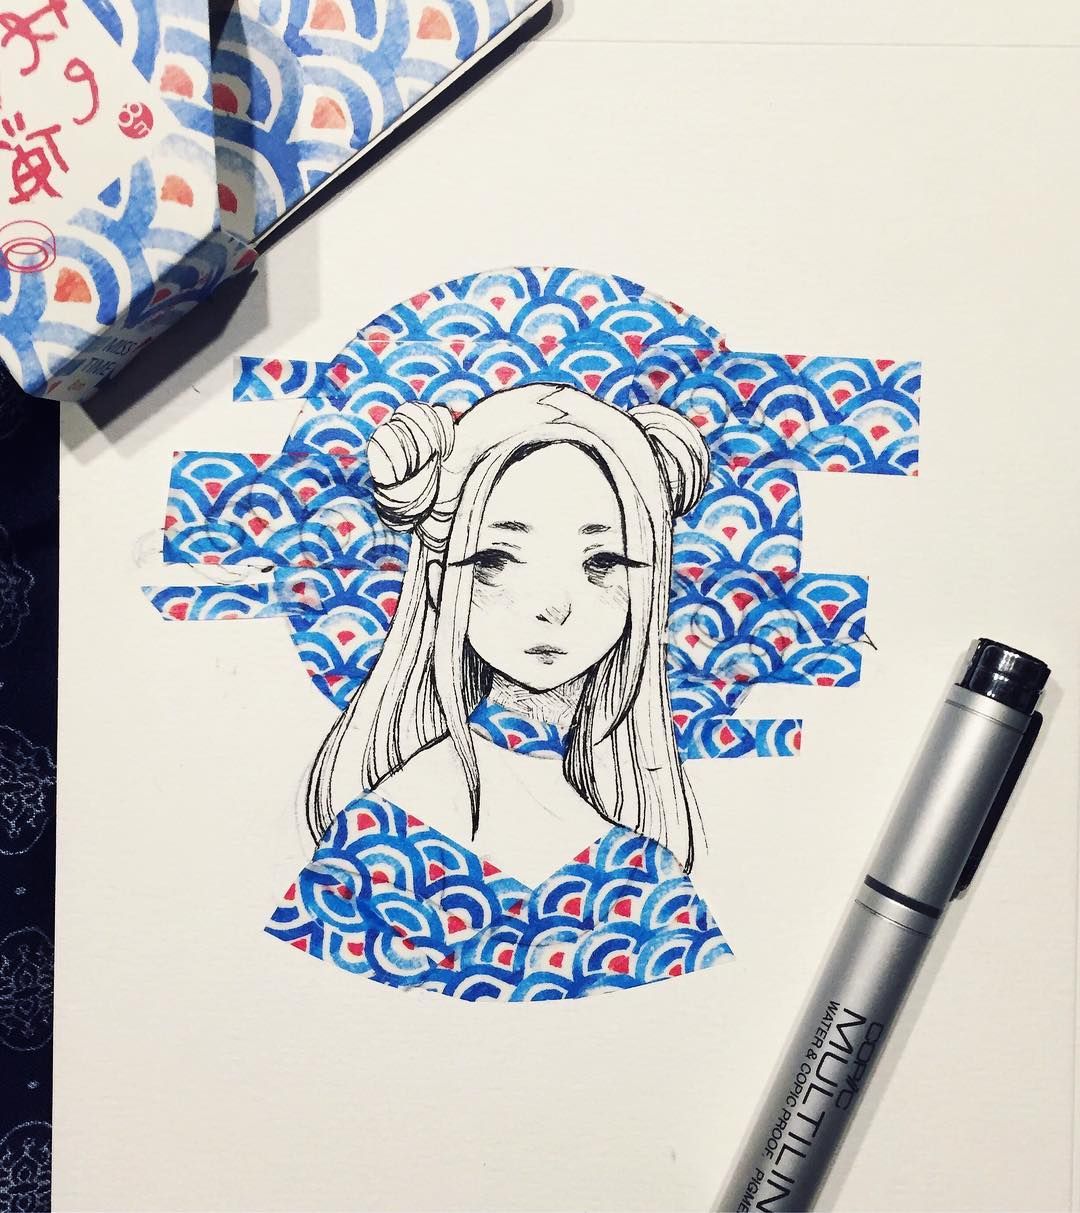 A photograph of a washi tape painting with a manga-style character with hair buns and blue circular washi tape creating their outfit and sun in the background.